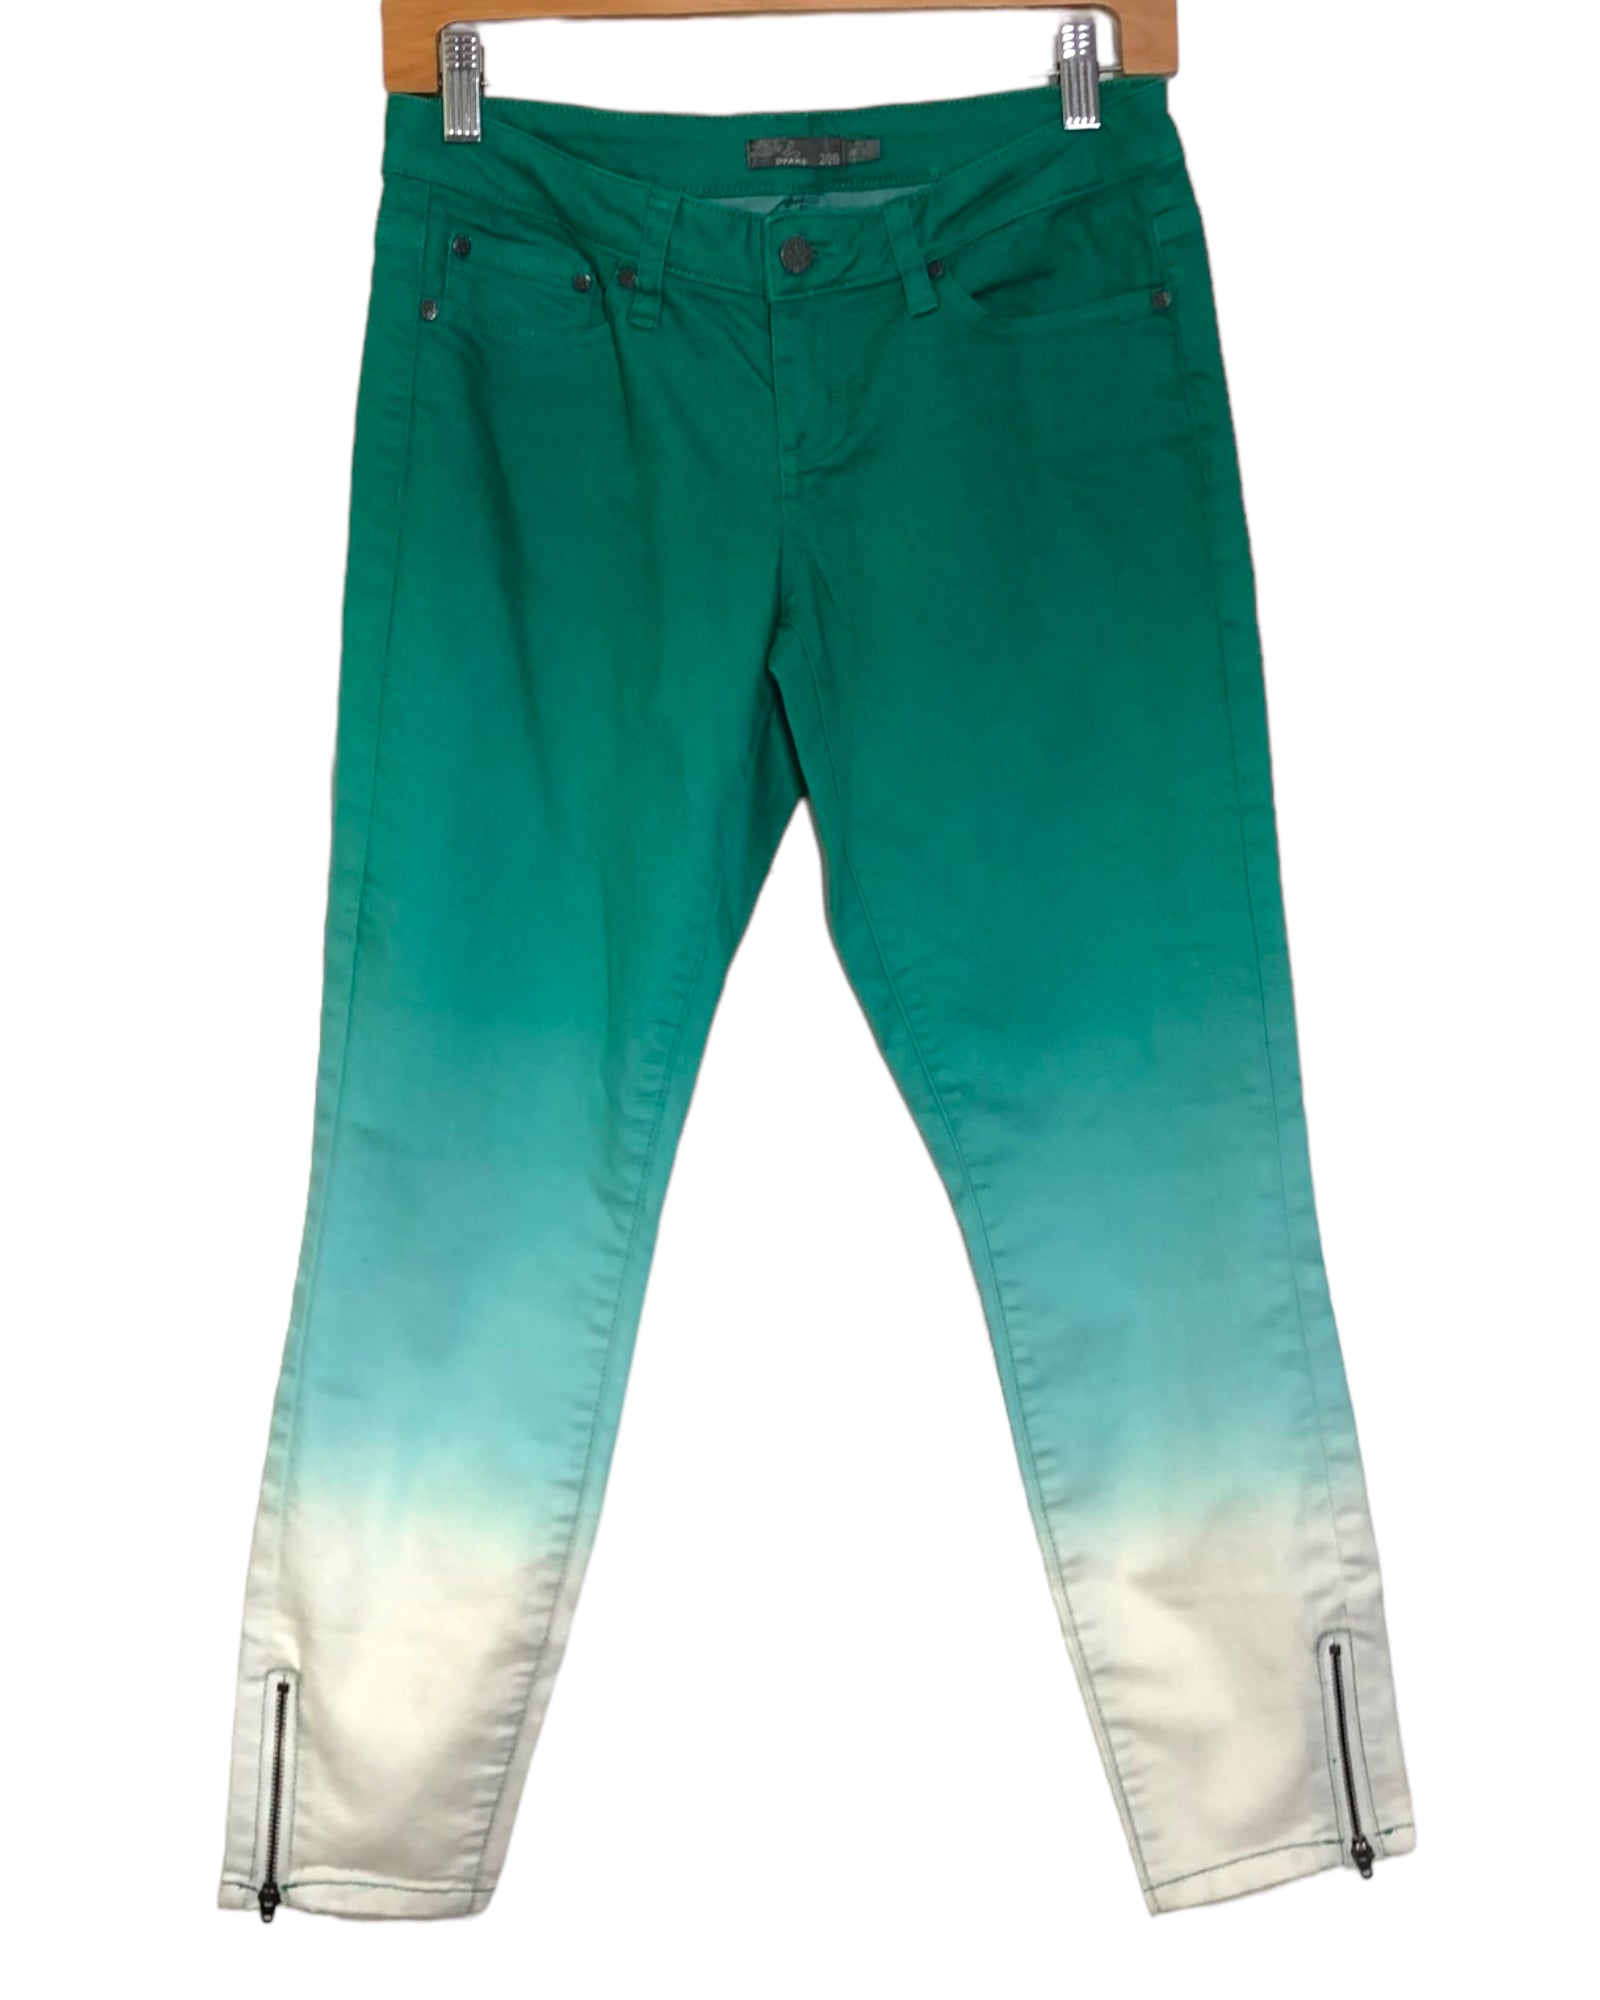 Cool Summer PRANA green ombre jeans